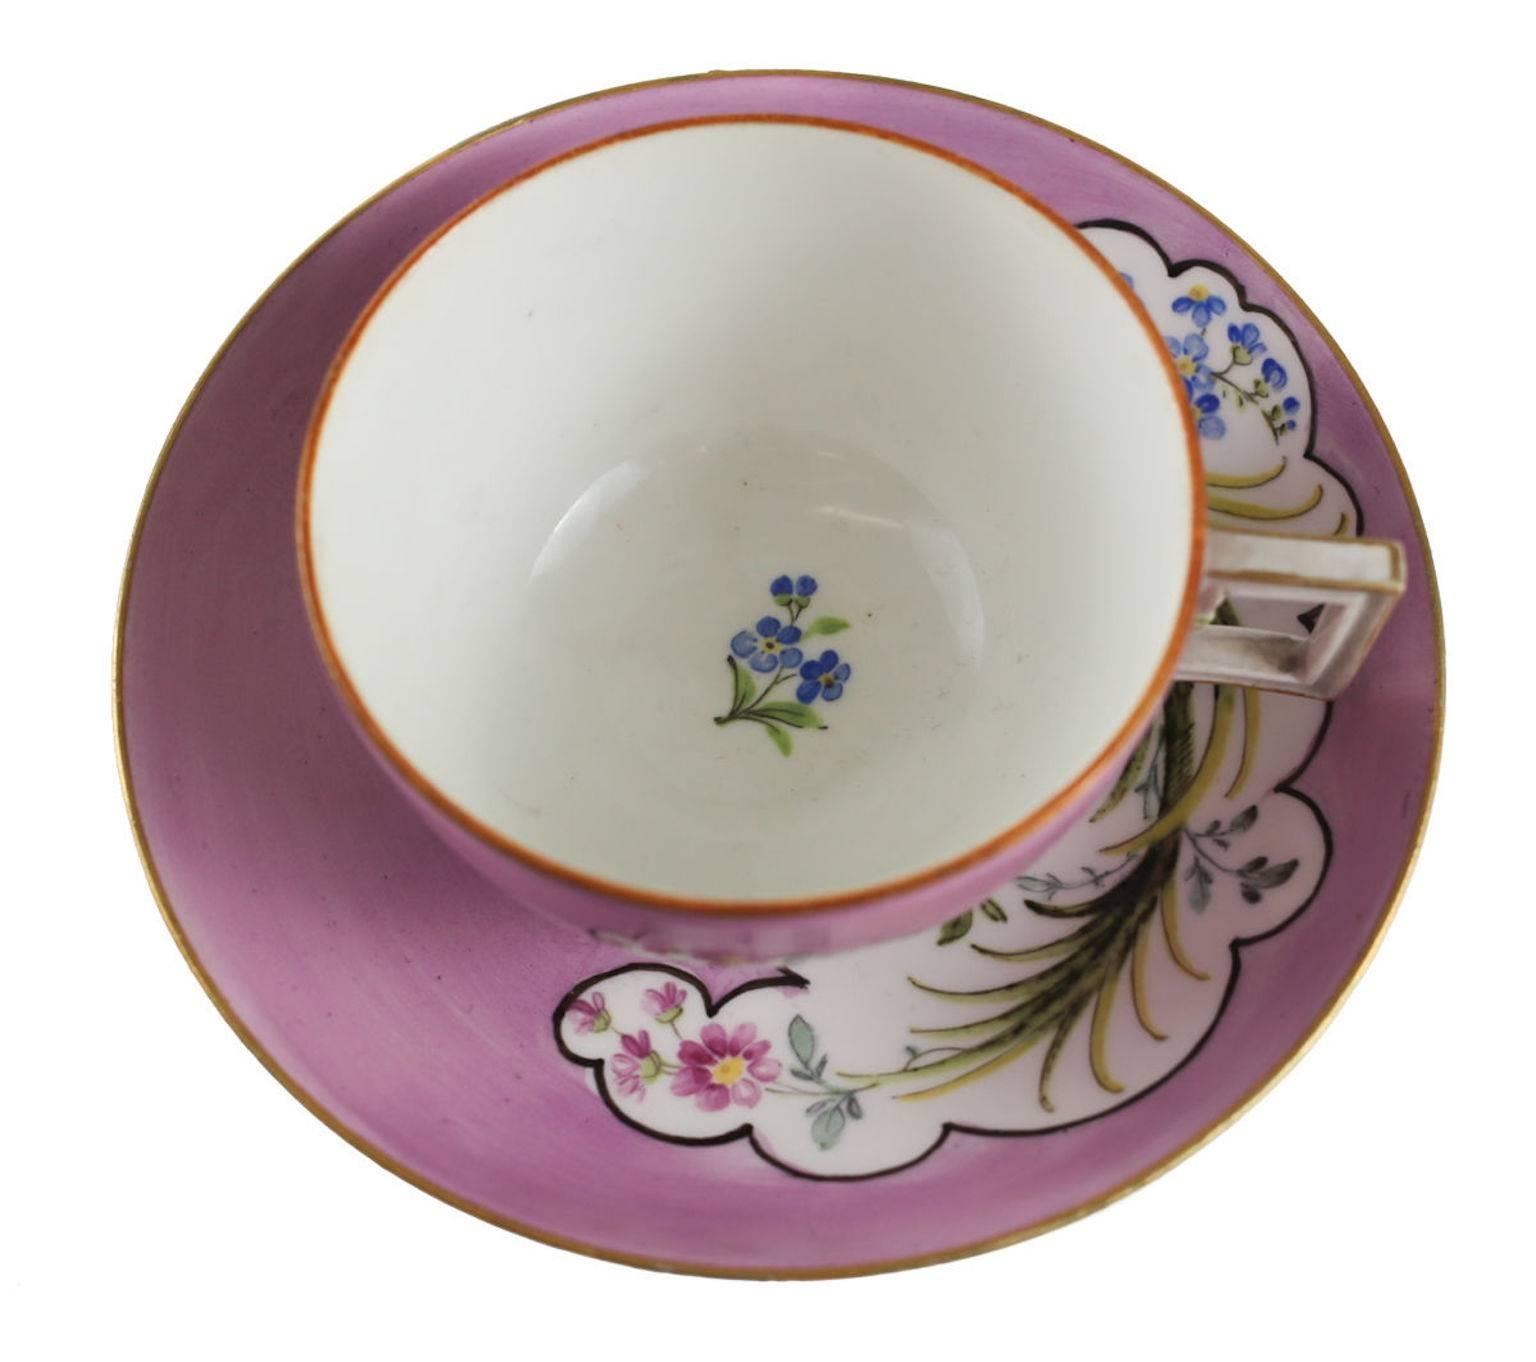 Meissen Germany porcelain cup and saucer, pink rose. Charming pink grounds with hand-painted florals inside a cloud form outlined design. Gilt to the rims. Marked to the underside.
Measures: Approximate, 3 inches, diameter (3.75 with handle) x 1.75